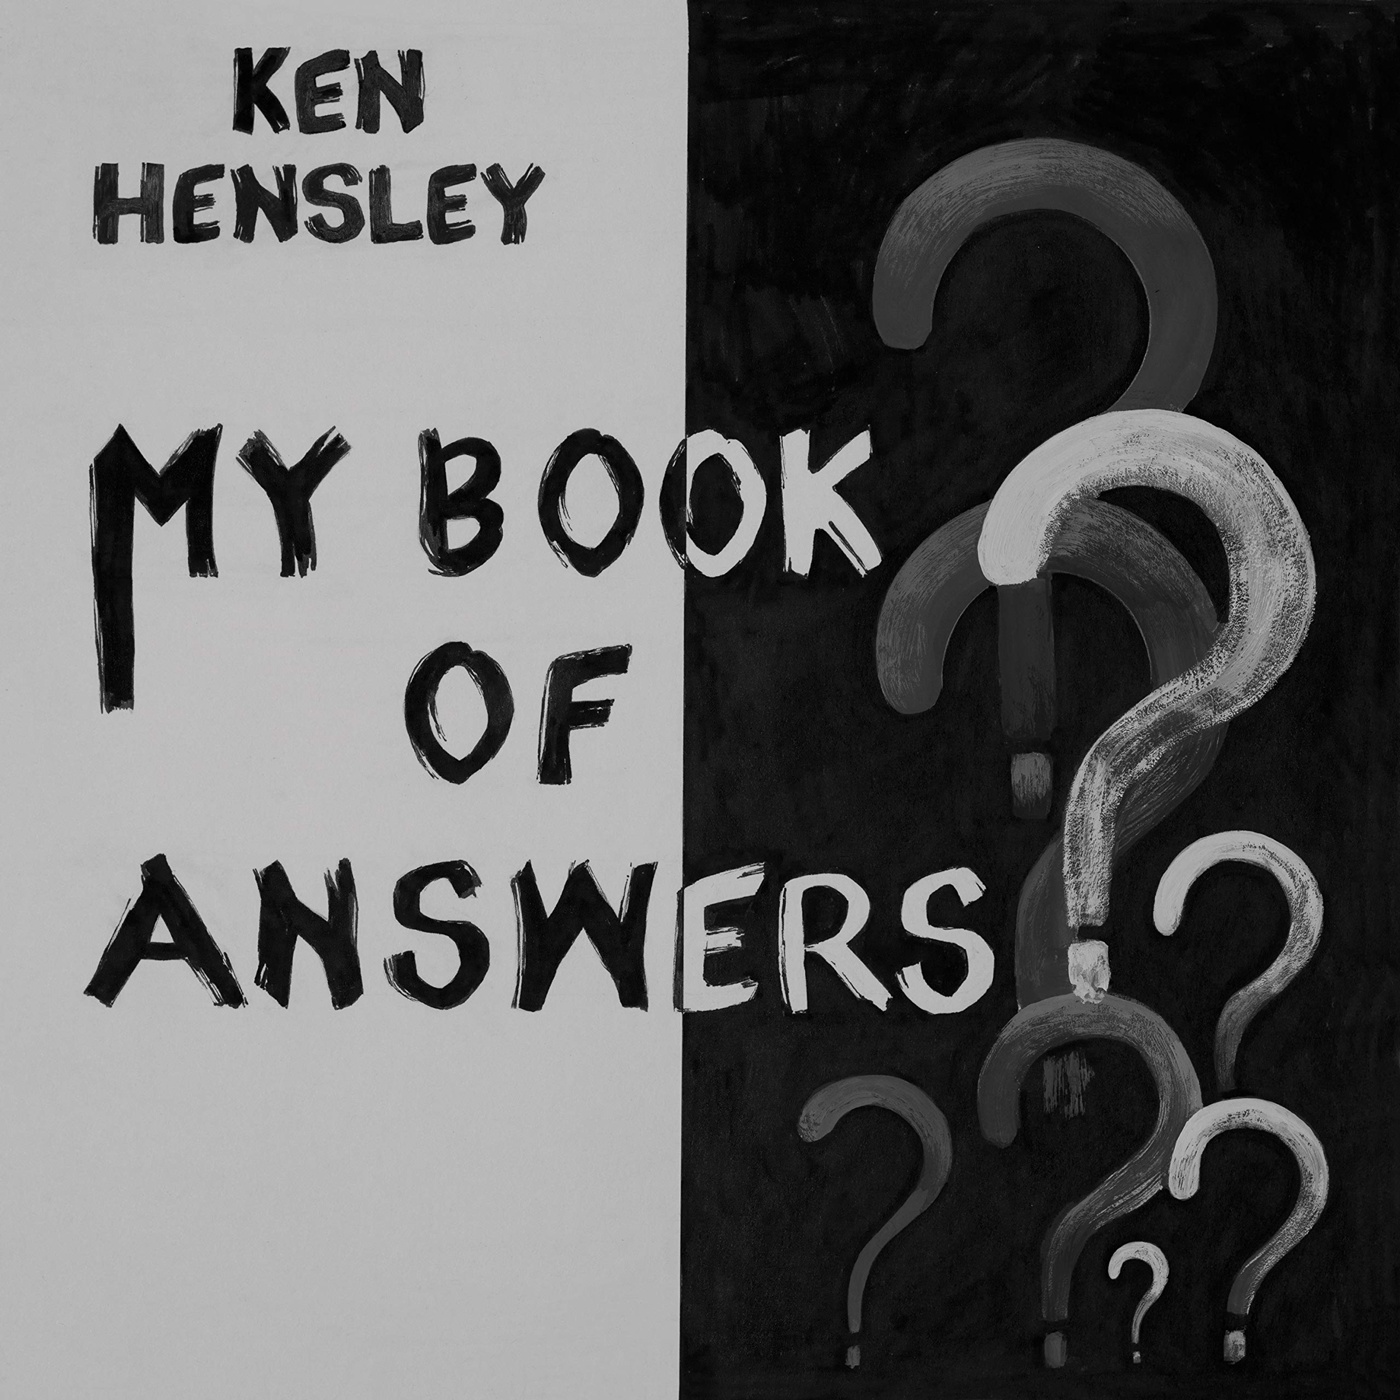 My book of answers vexin